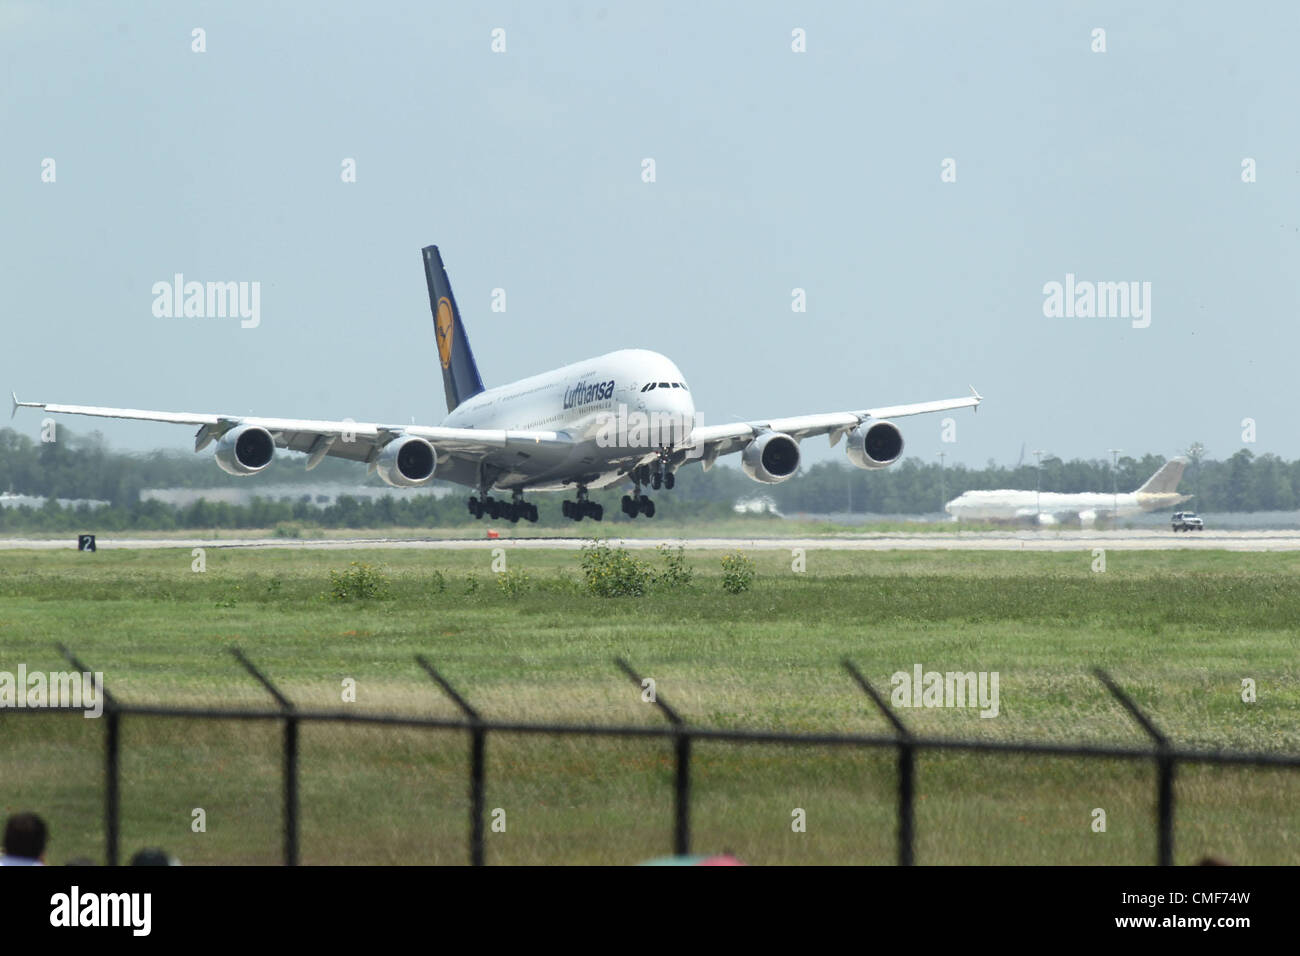 1st Aug 2012. HOUSTON: This is the inaugural flight of Lufthansa's Airbus 380 at Bush Intercontinental airport. The double-decker jet landed shortly before 2pm on Wed. August 1 Credit:  ZUMA Press, Inc. / Alamy Live News Stock Photo